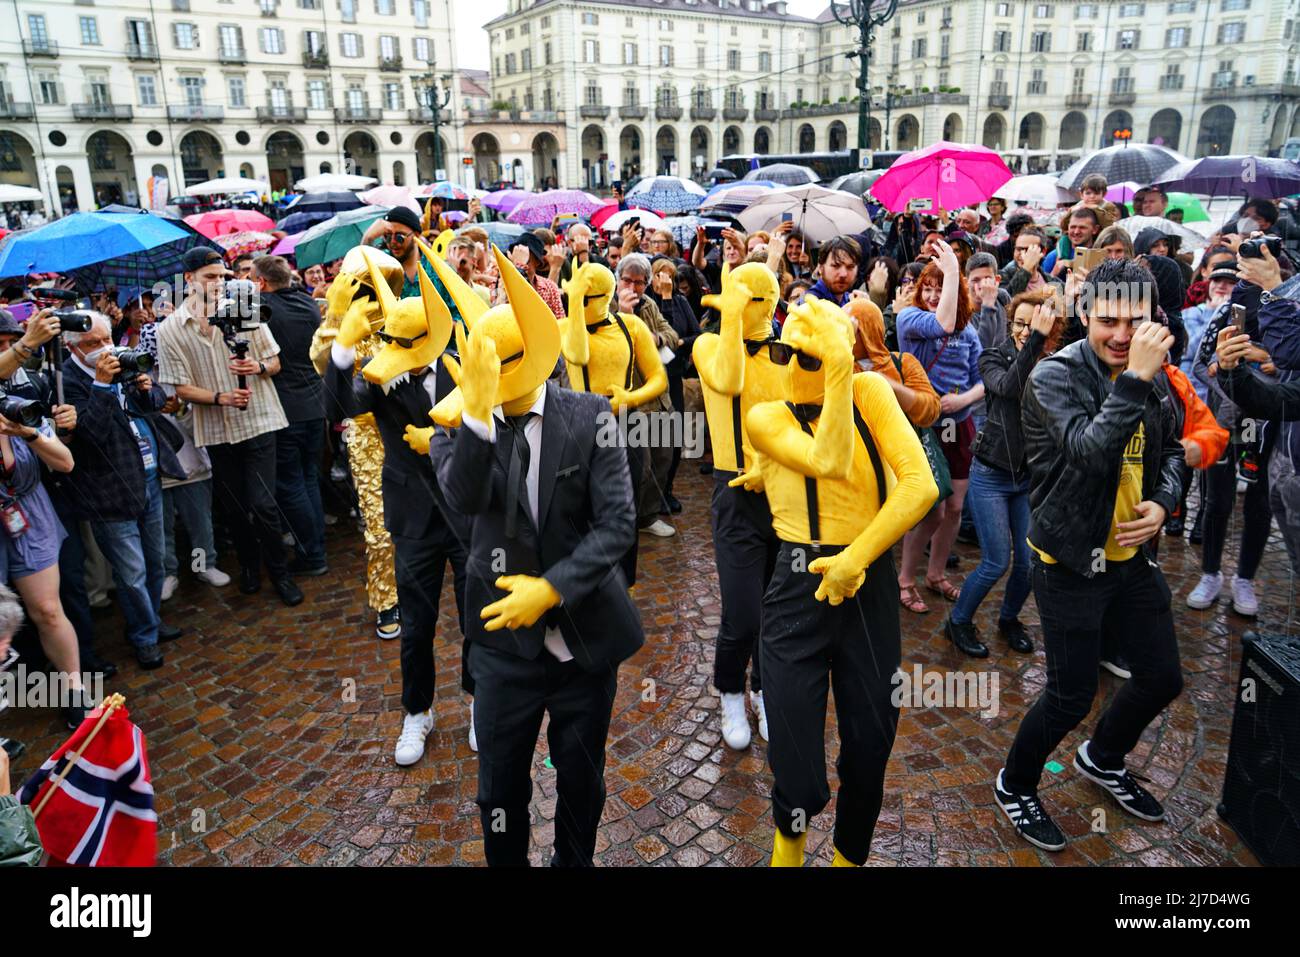 Flash mob among Subwoolfer fans to dance together Give That Wolf A Banana. The EuroVision Song Contest 2022 in Turin, Italy.  TURIN, ITALY - MAY 2022 Stock Photo